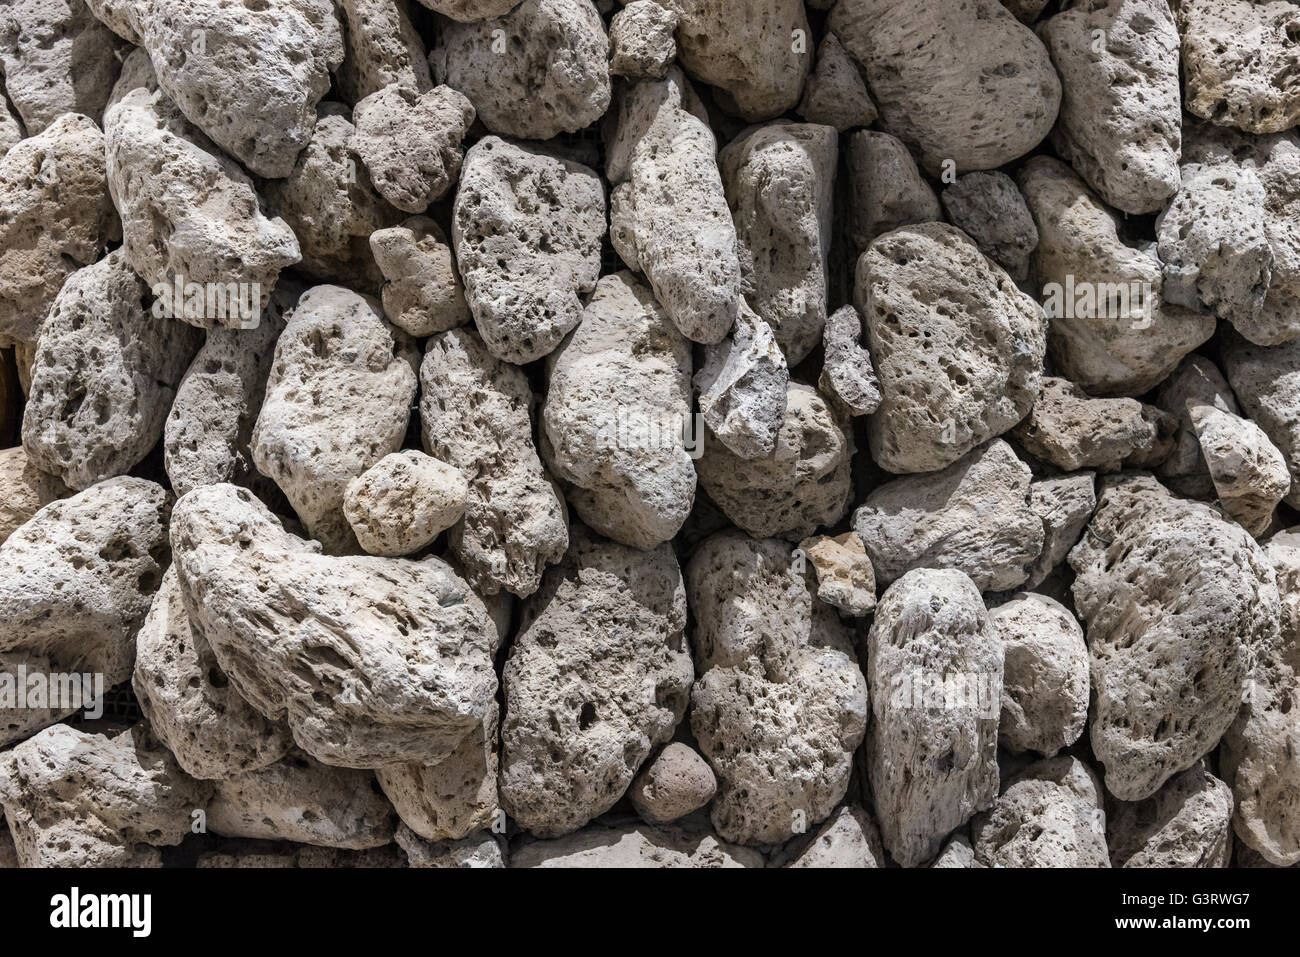 A pile of pumice rock. Stock Photo